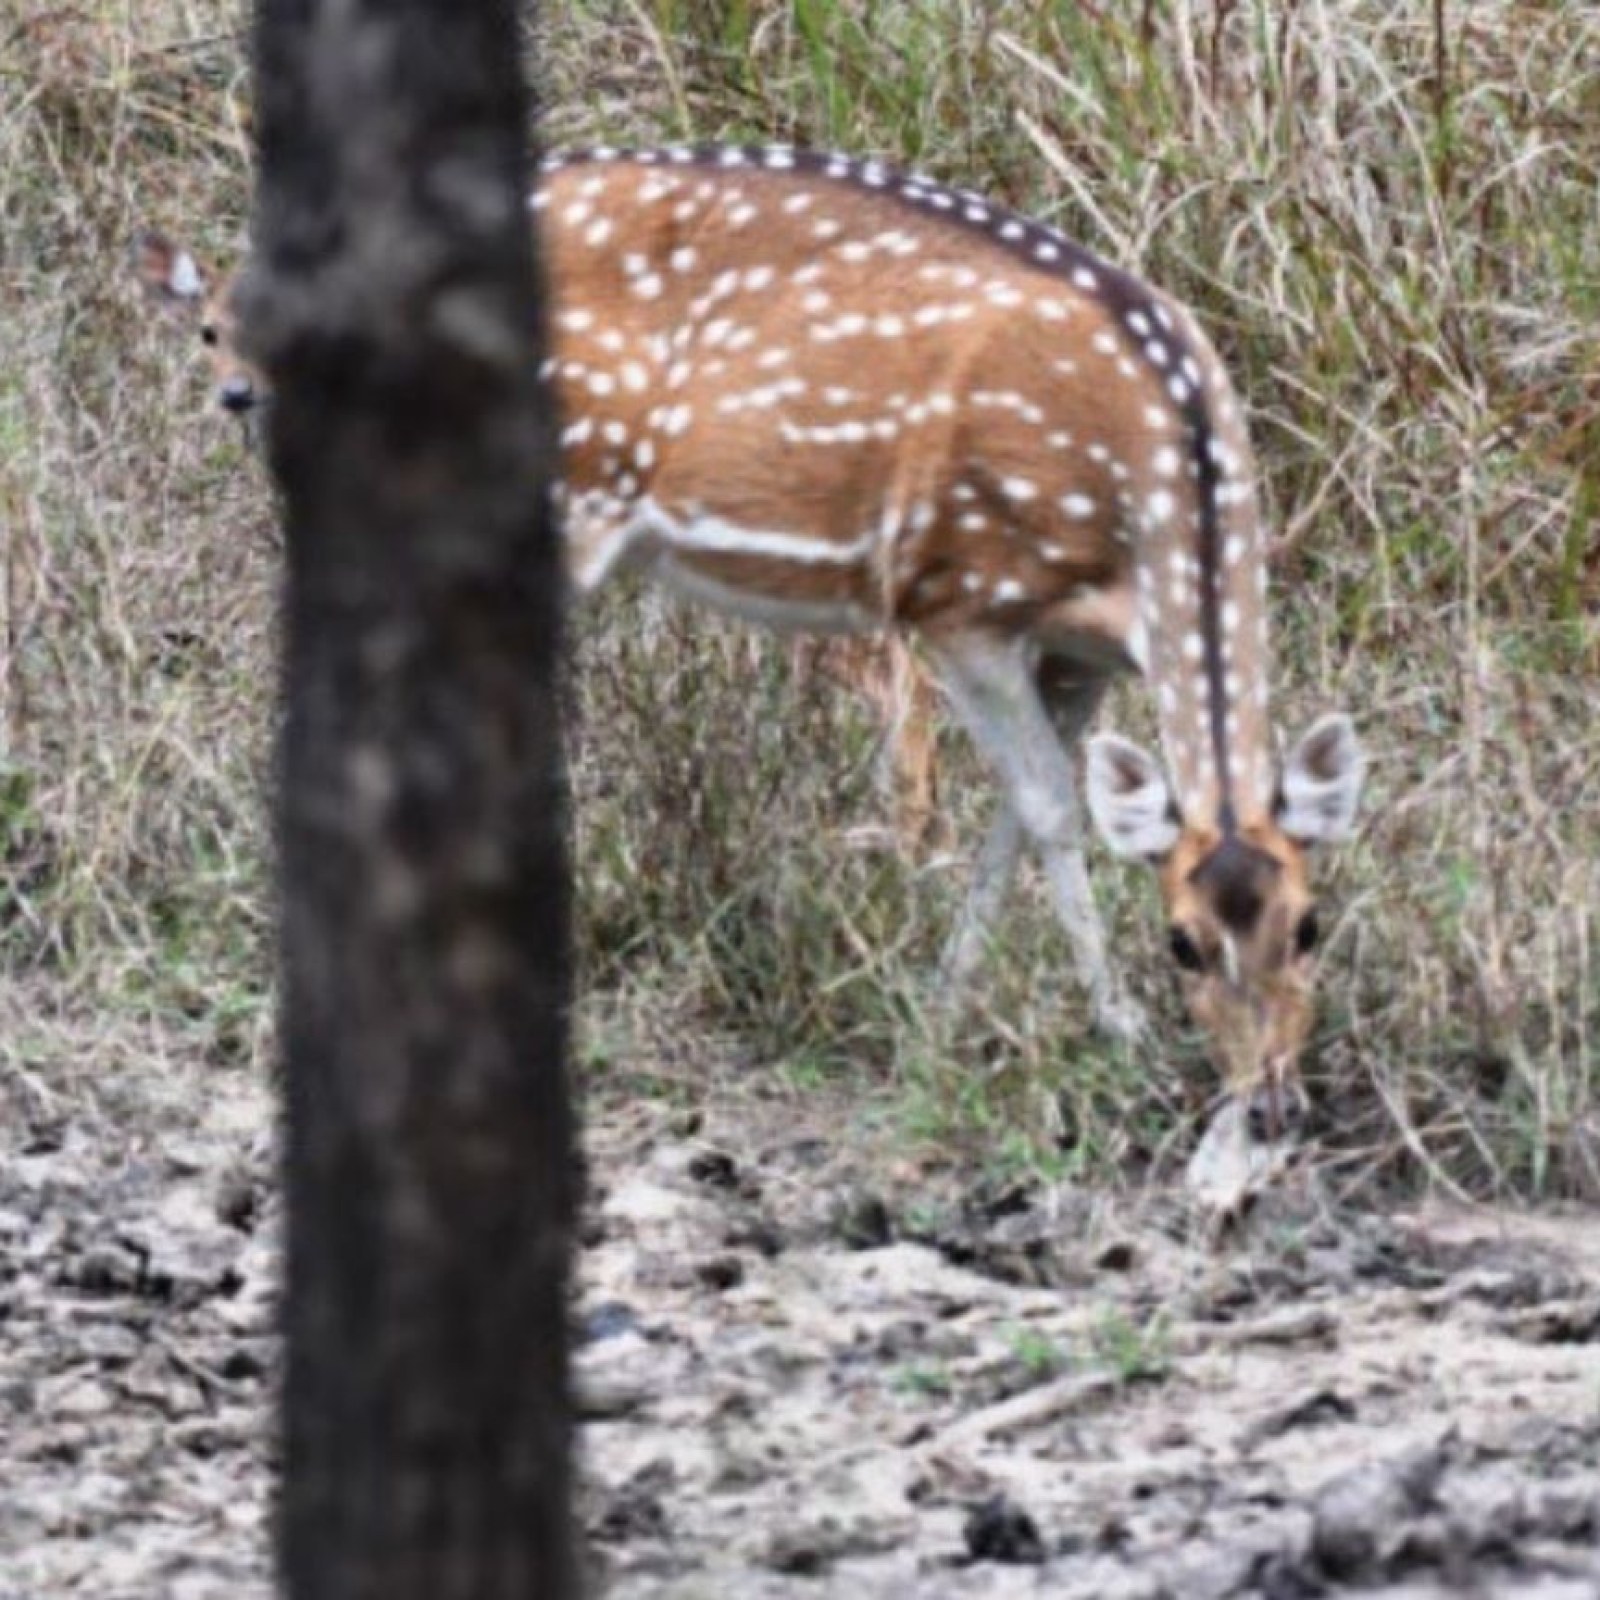 Deer Pictured Gnawing on Bone in Wild